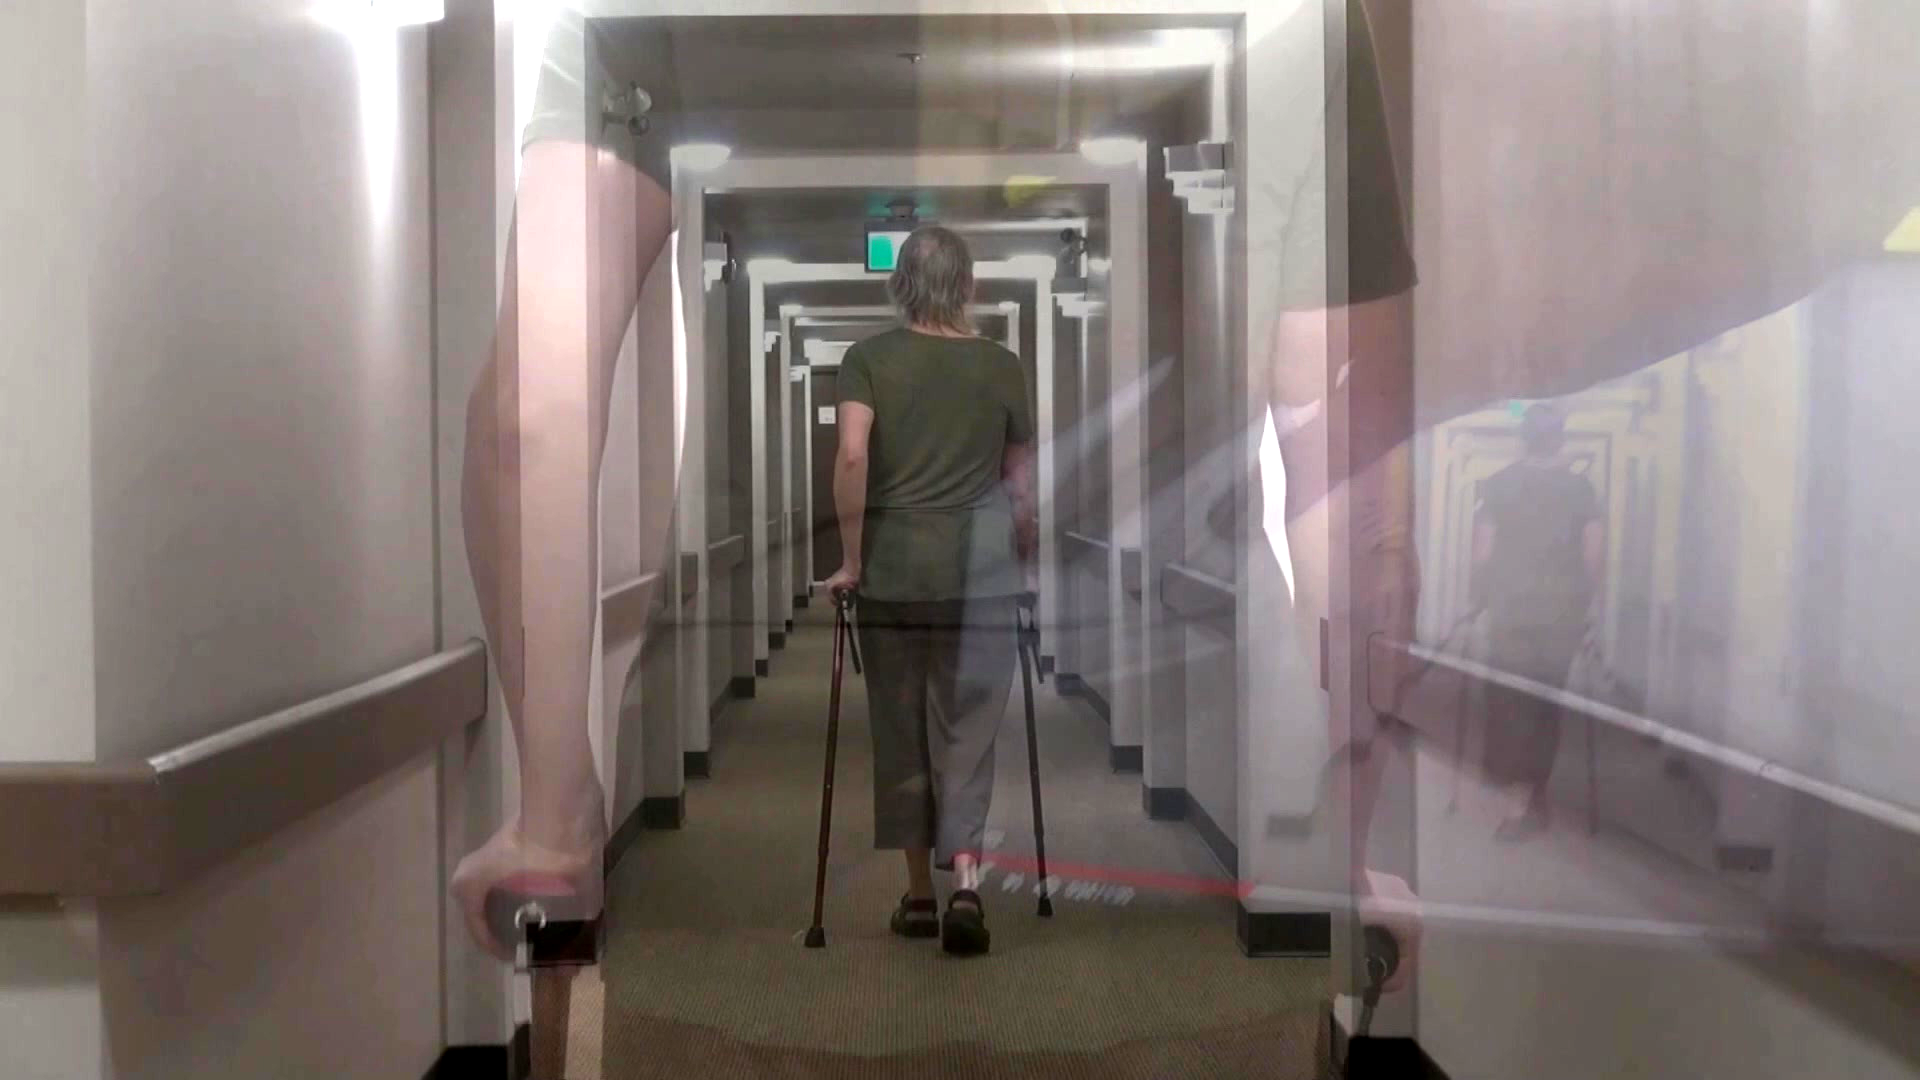 A person walking away in a narrow hallway using walking sticks. The person wears a dark green outfit. The image has a multiple exposure effect.